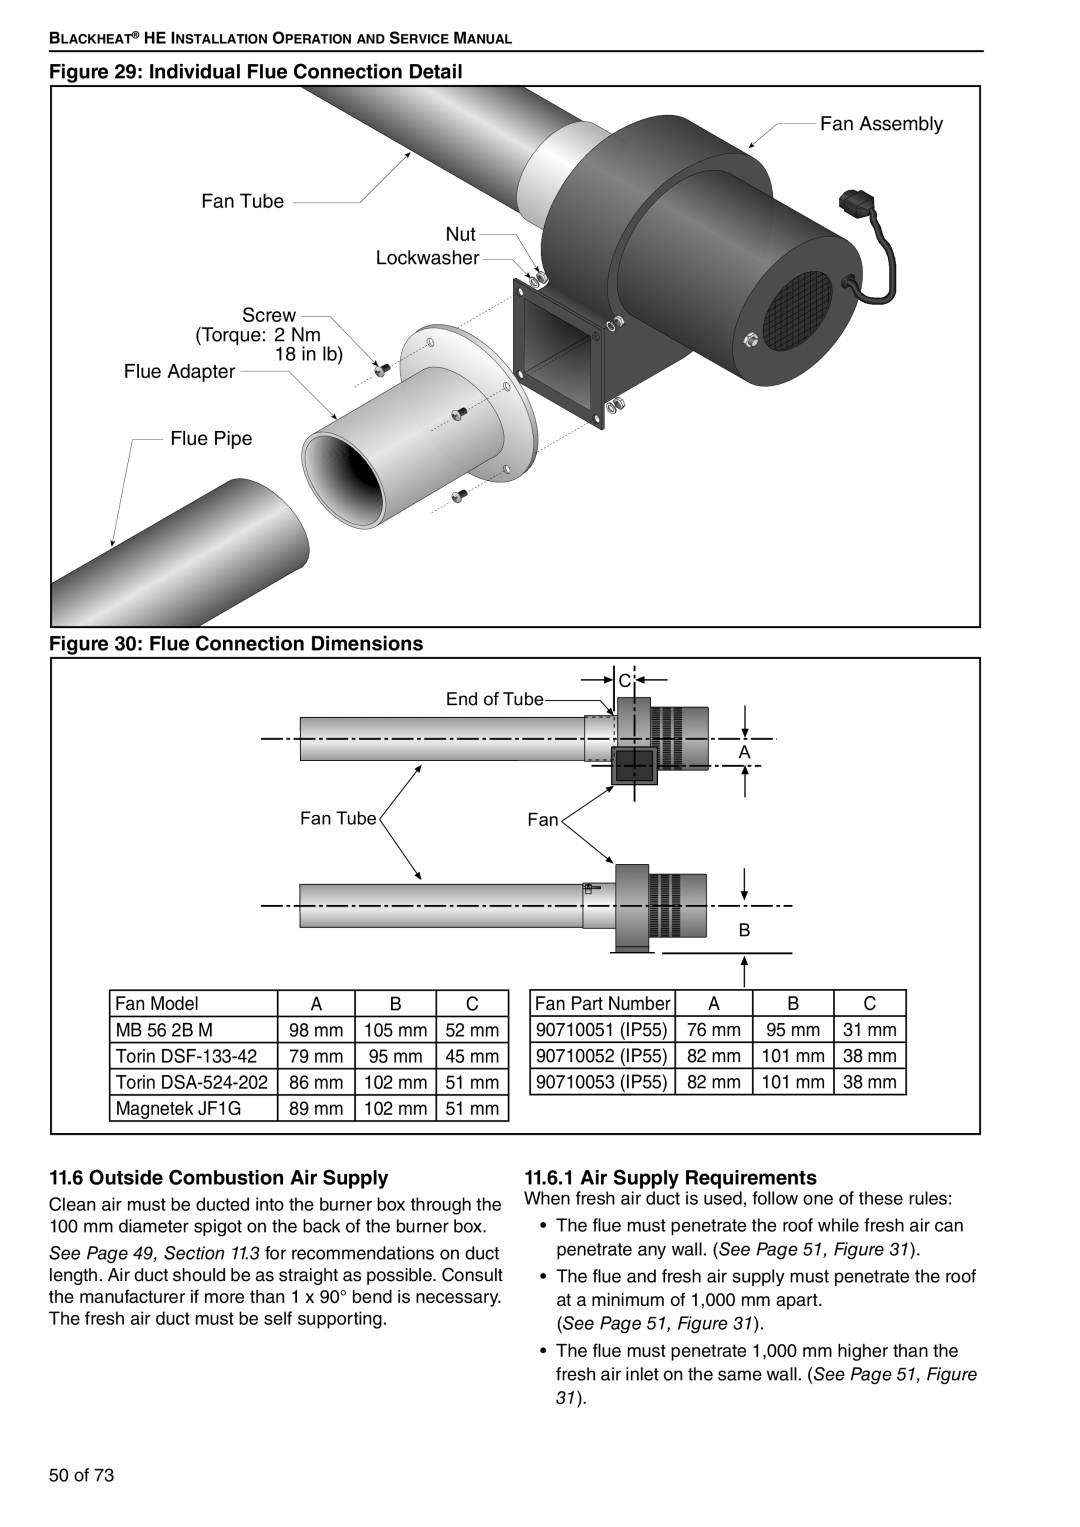 Roberts Gorden HE25ST, HE20ST Individual Flue Connection Detail, Flue Connection Dimensions, Outside Combustion Air Supply 